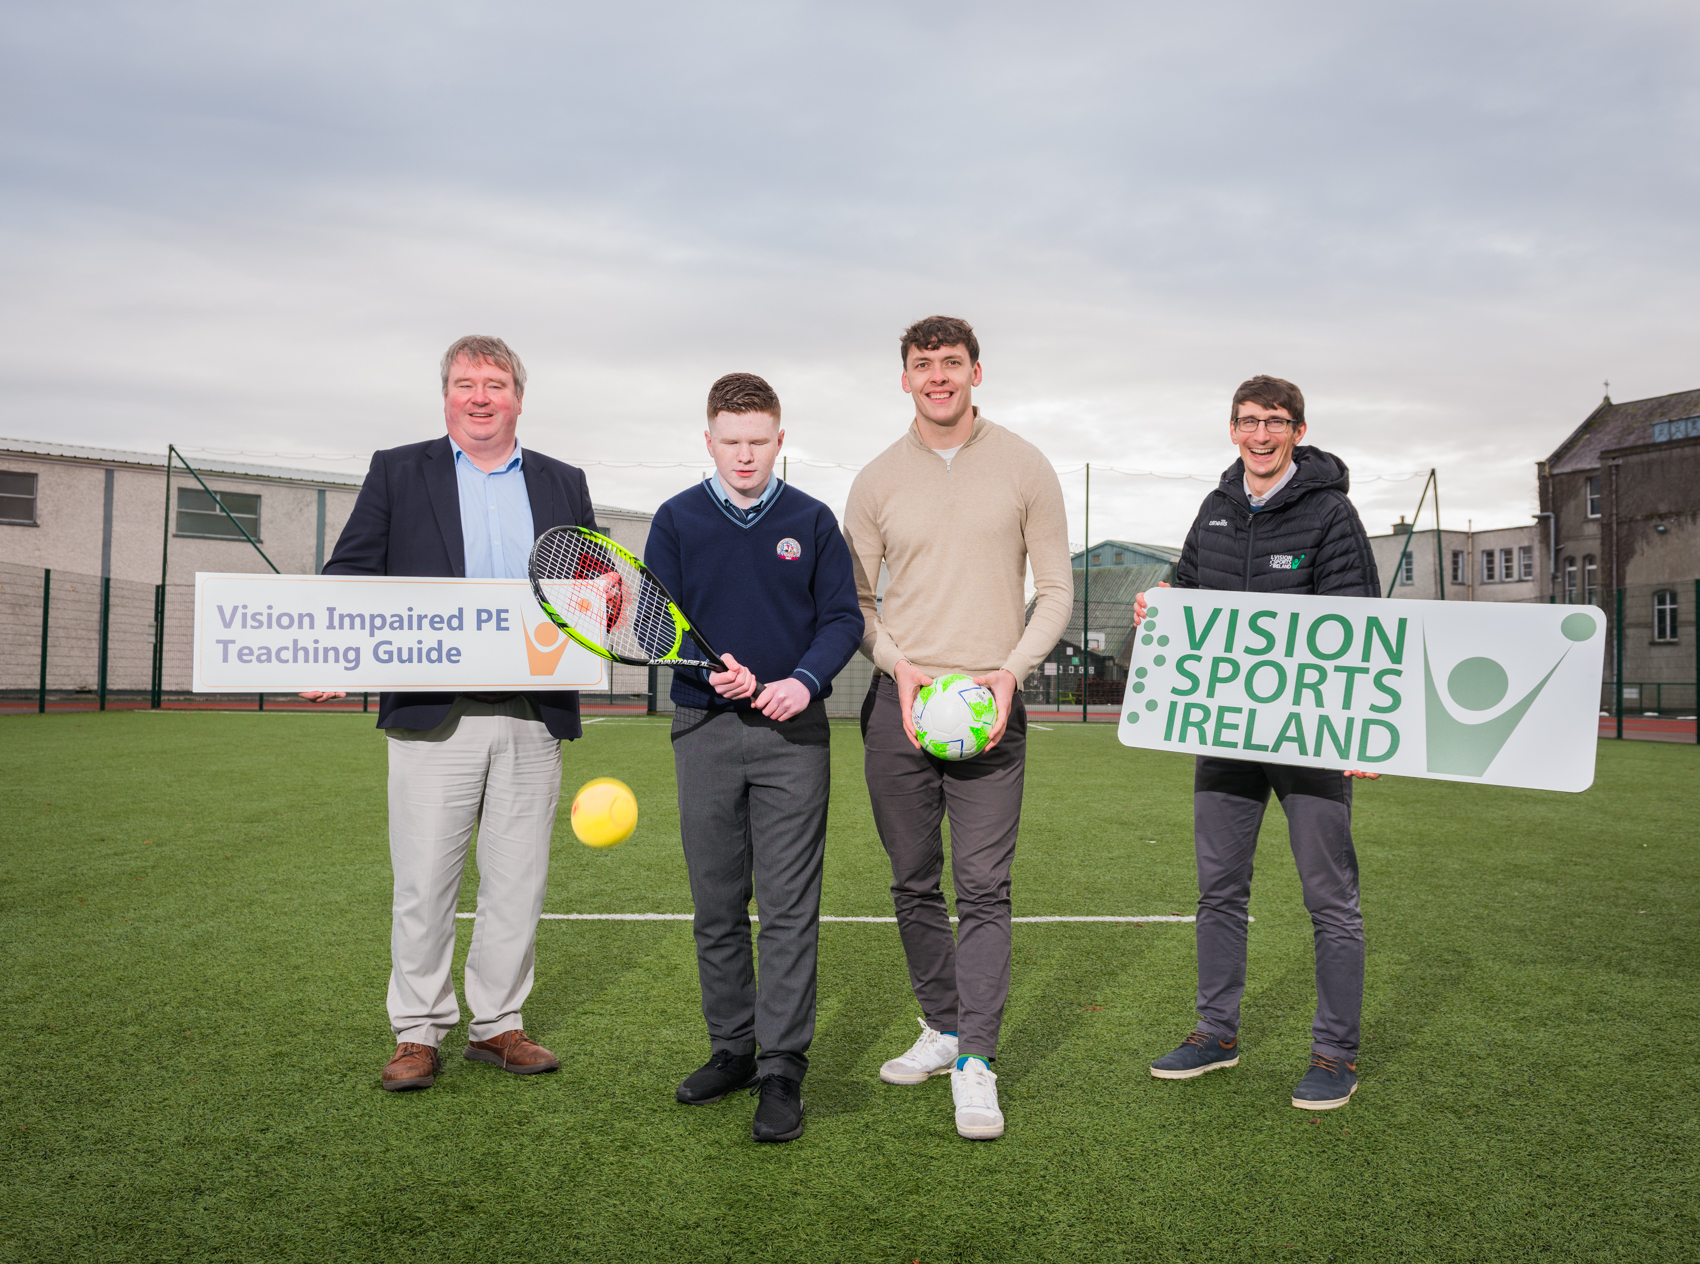 Senator Martin Conway, student Michael O Brien, Kerry footballer David Clifford and Padraig Healy from Vision Sports Ireland stand holding signs a football and a tennis racket to launch the Vision Impaired PE Teaching Guide.